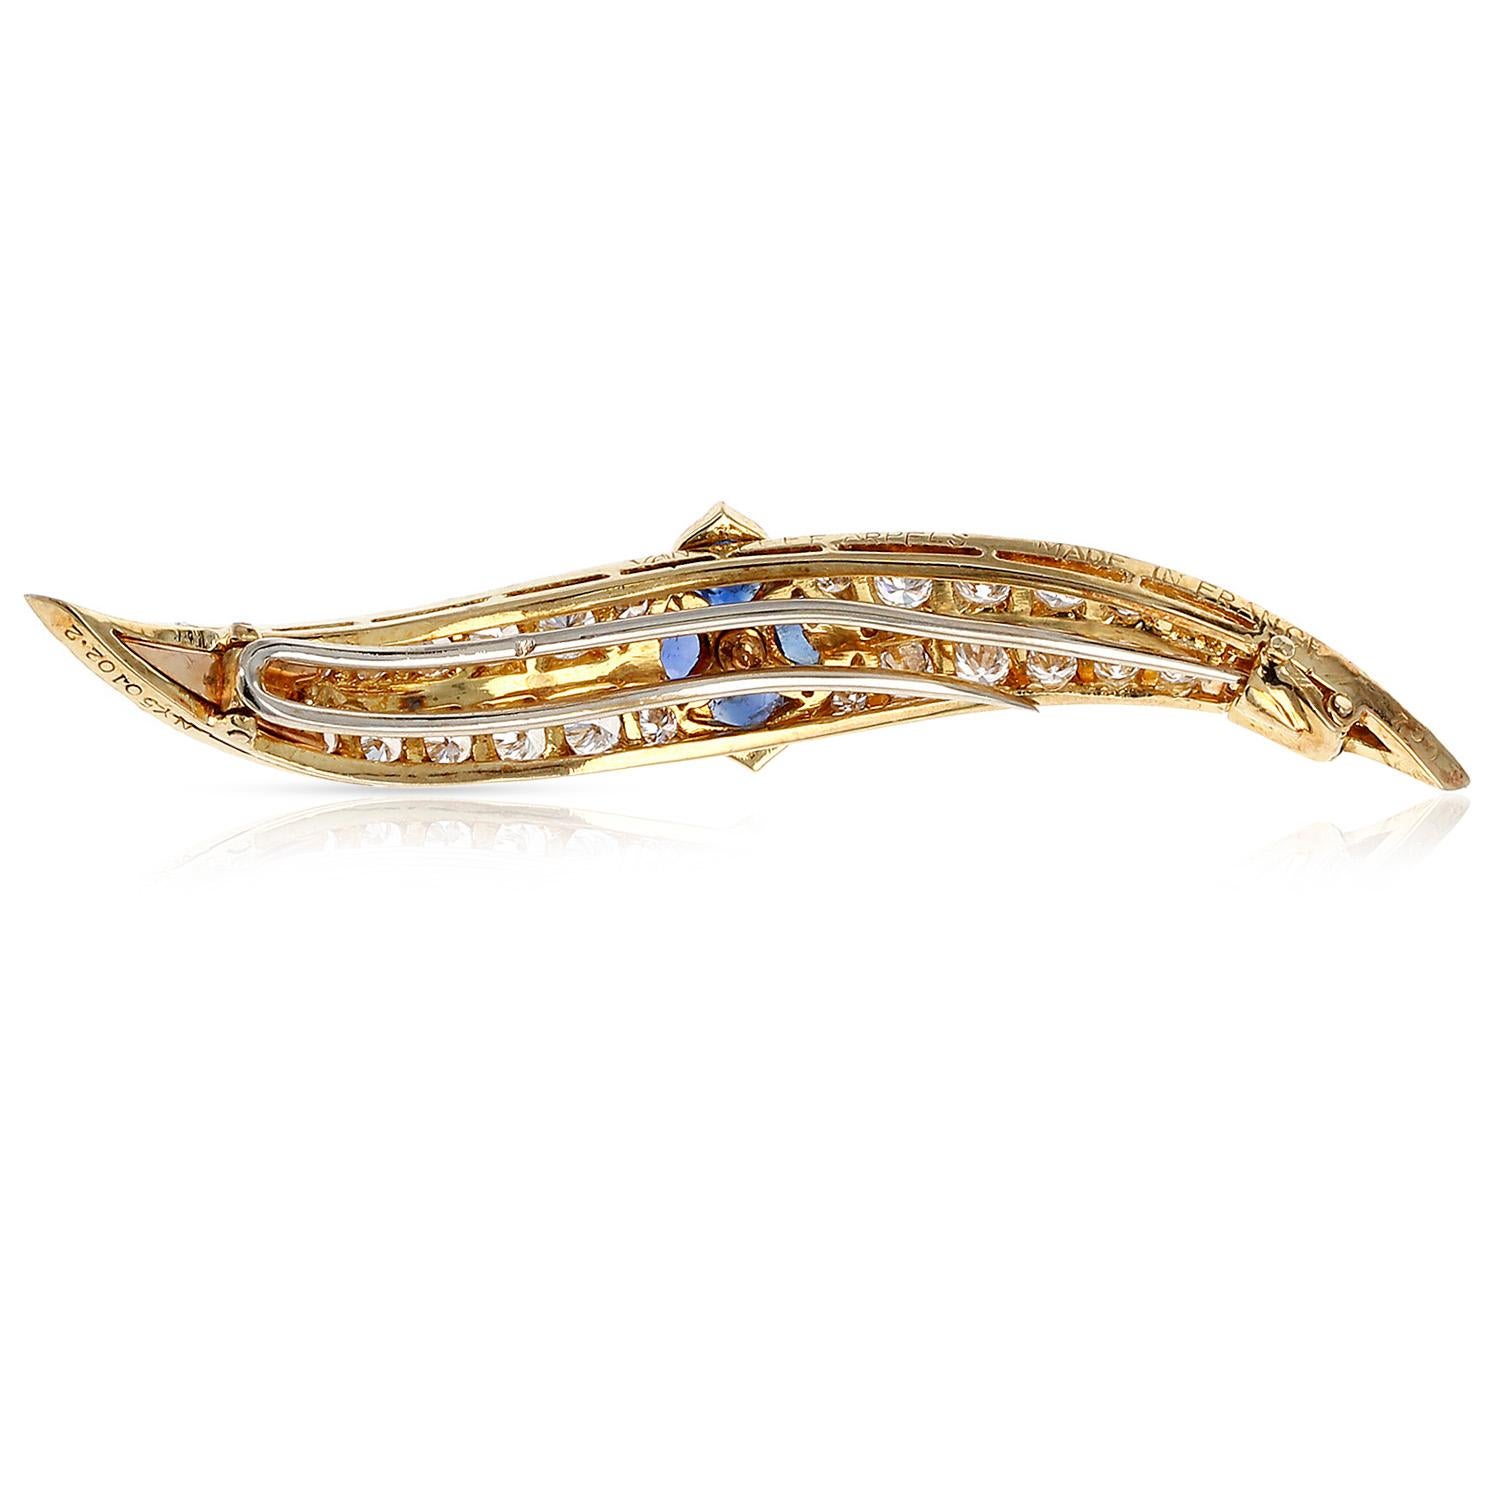 Round Cut French Van Cleef & Arpels Sapphire Floral and Diamond Pin/Brooch, 18K Yellow For Sale